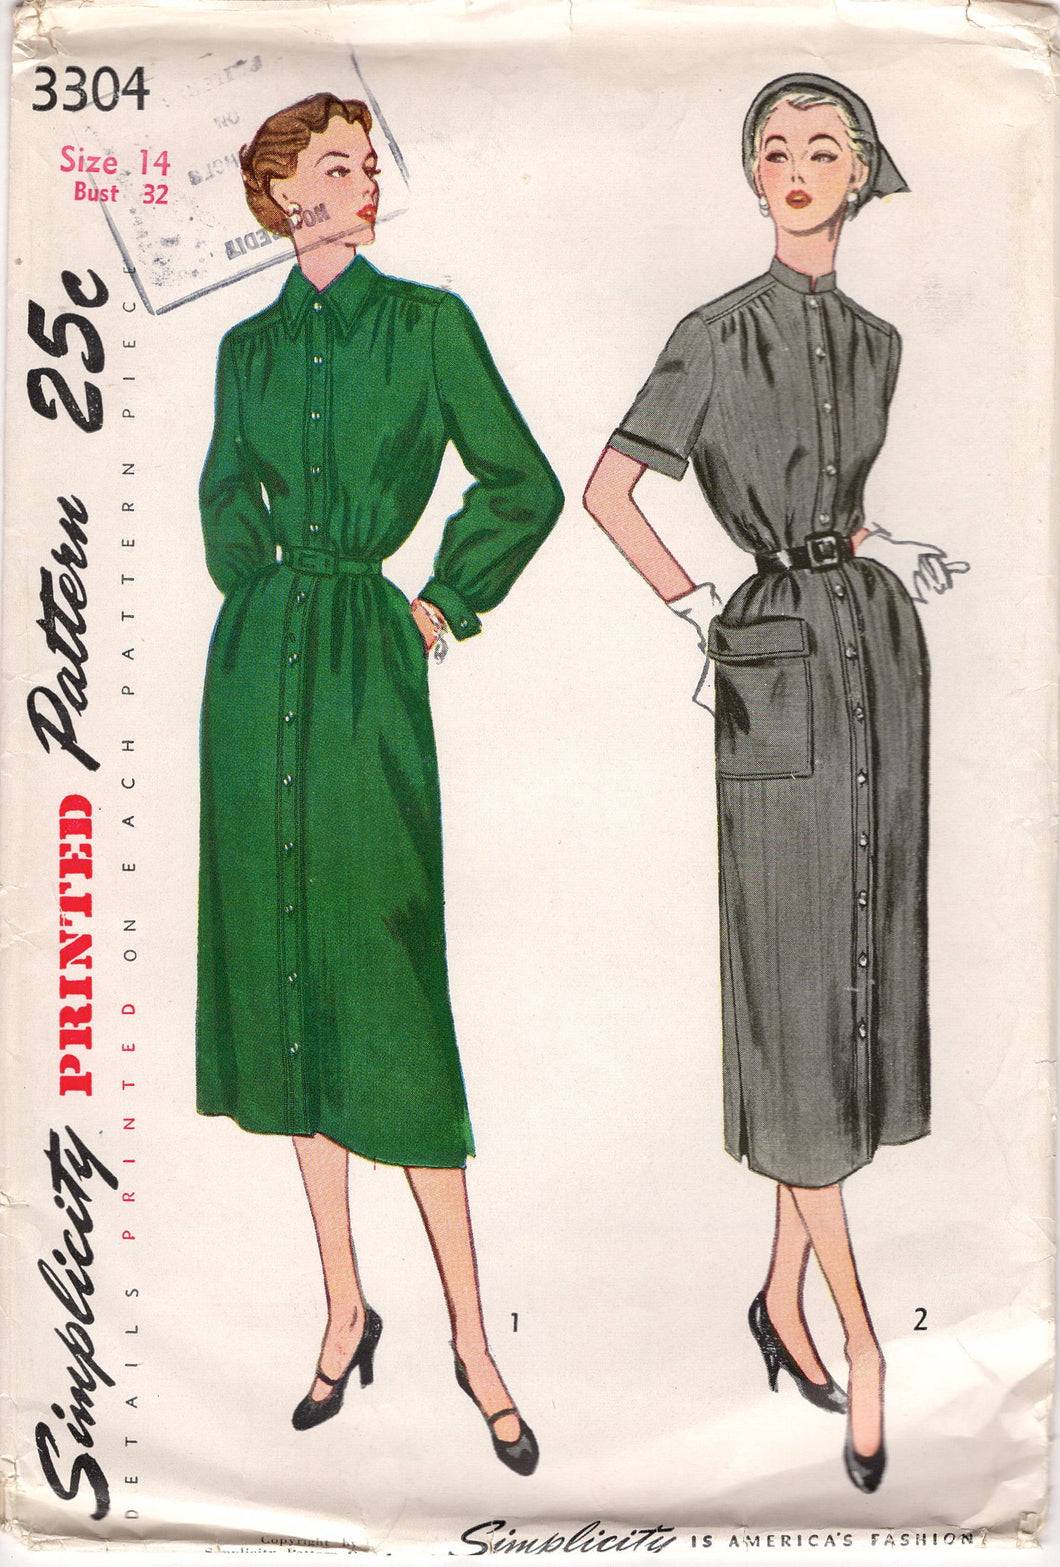 1950's Simplicity Button Up Sheath Dress Pattern with Mandarin or Pointed Collar - Bust 32